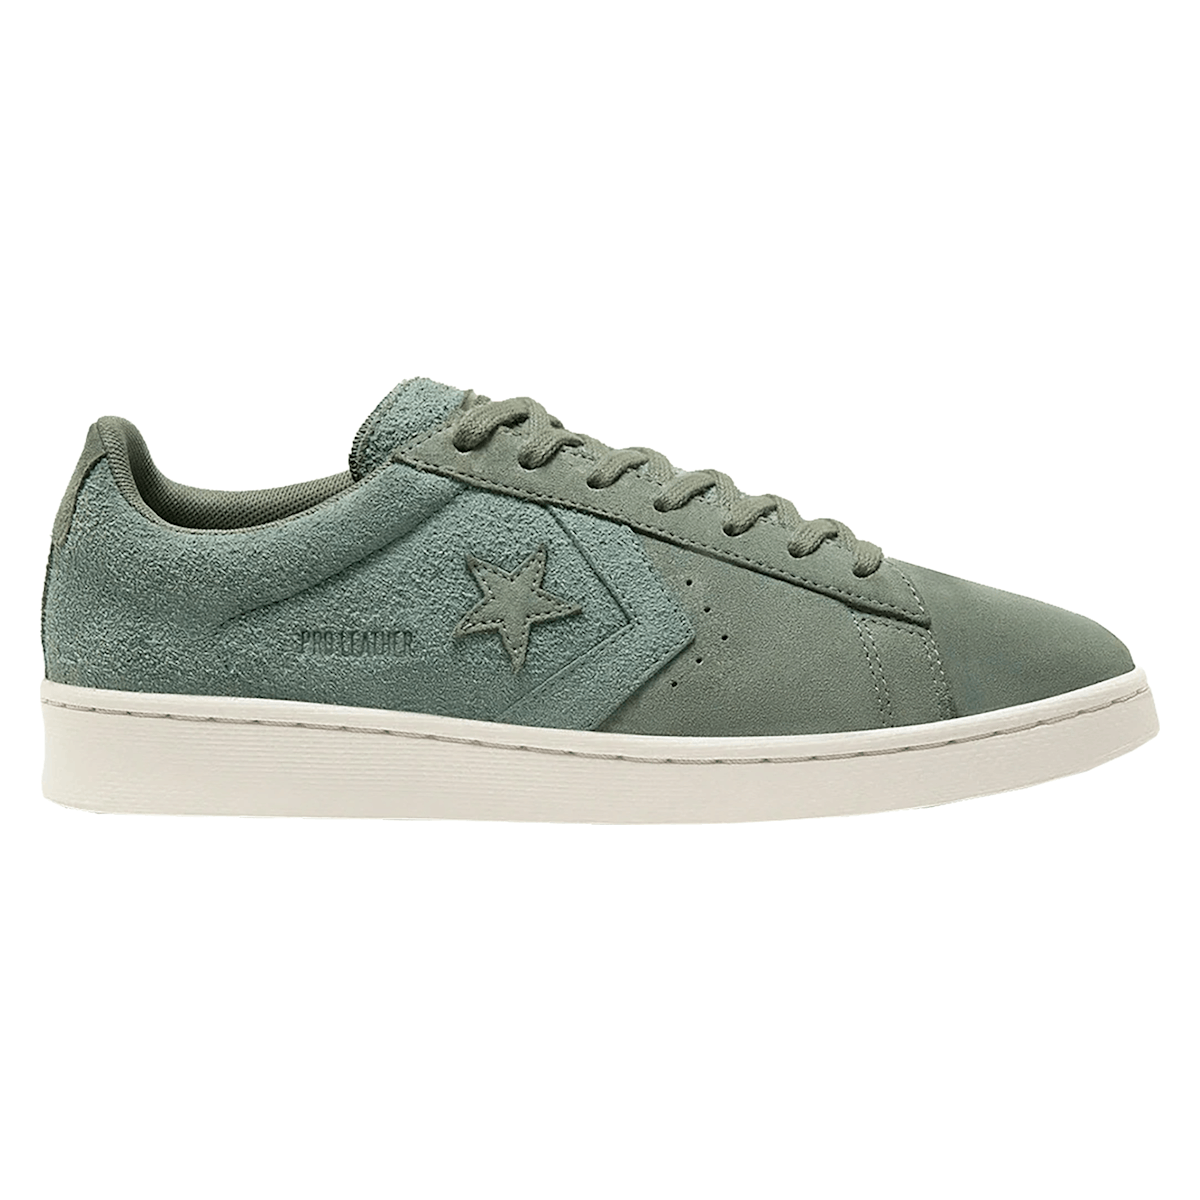 Converse Pro Leather Ox Lily Pad